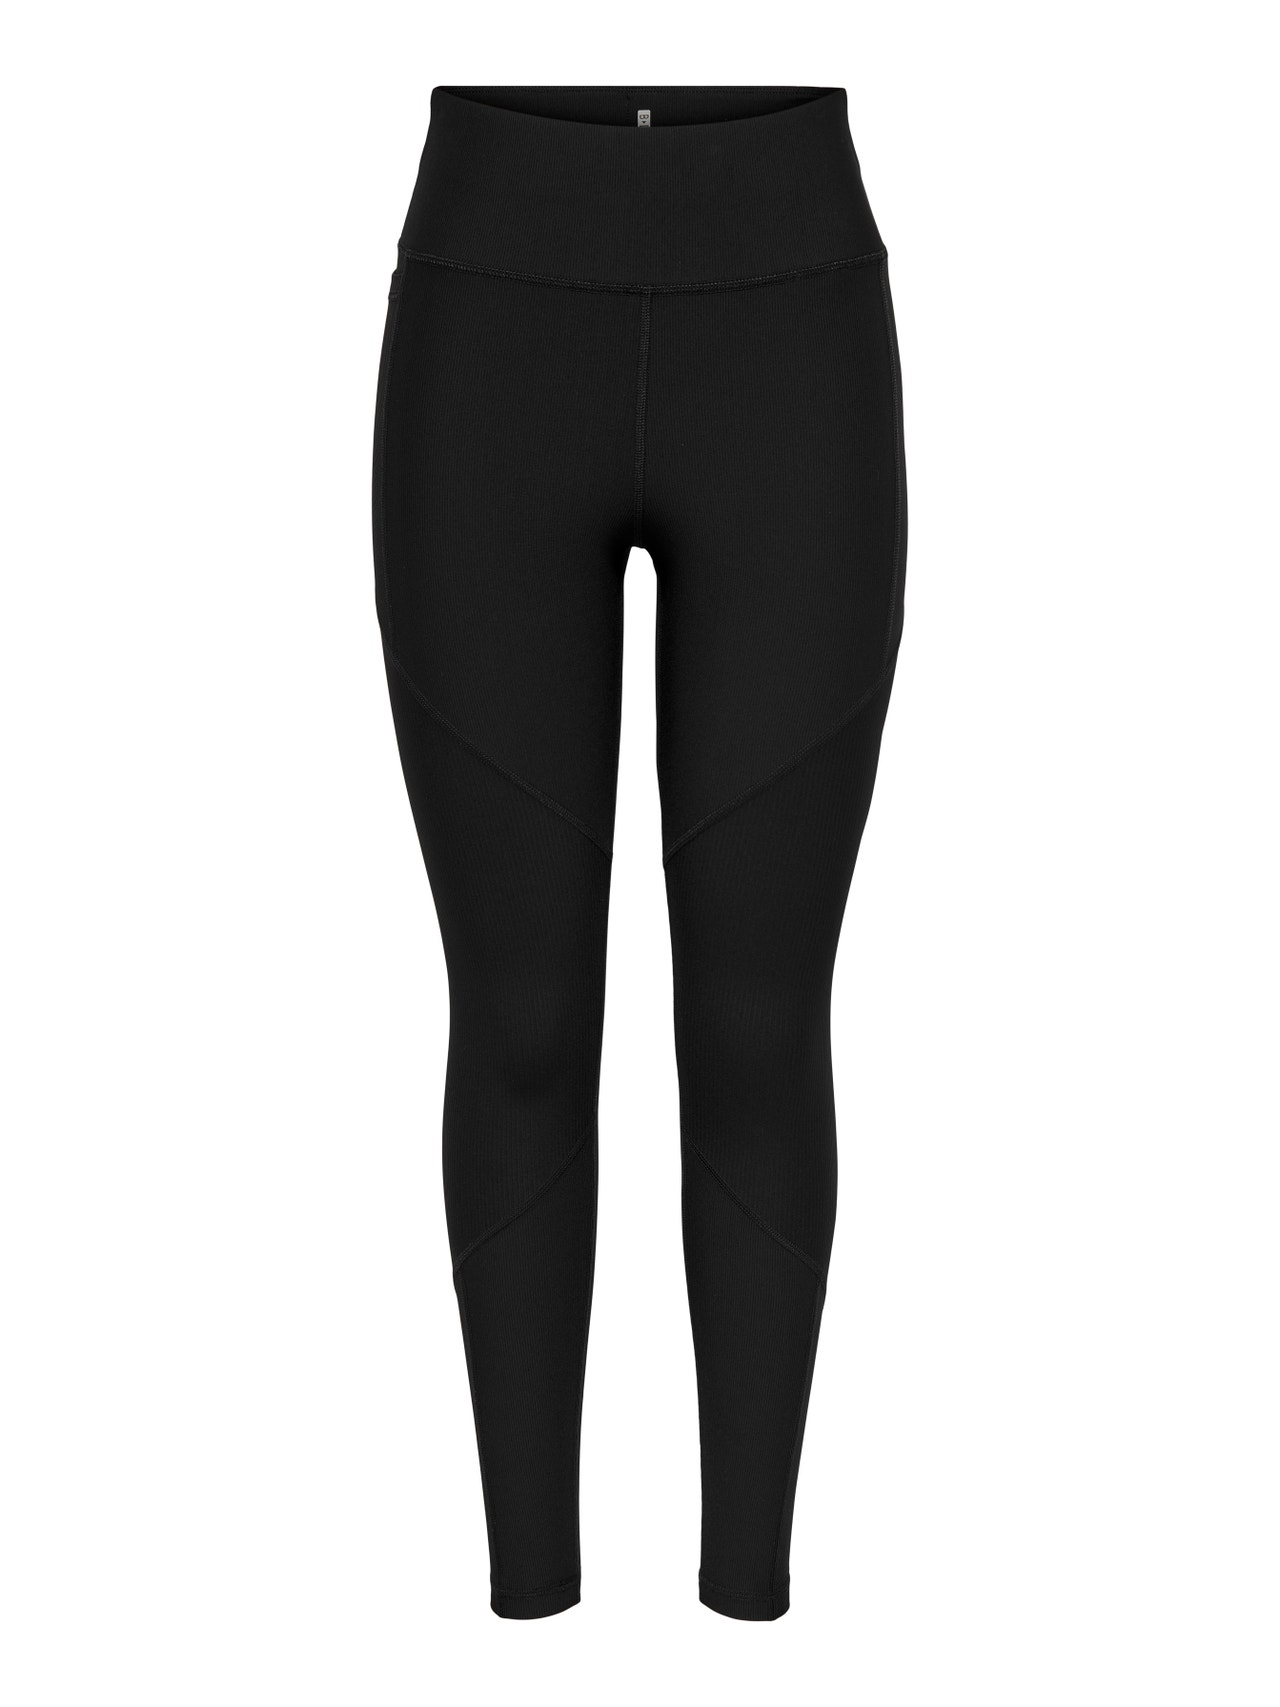 ONLY High waist Training Tights -Black - 15207648